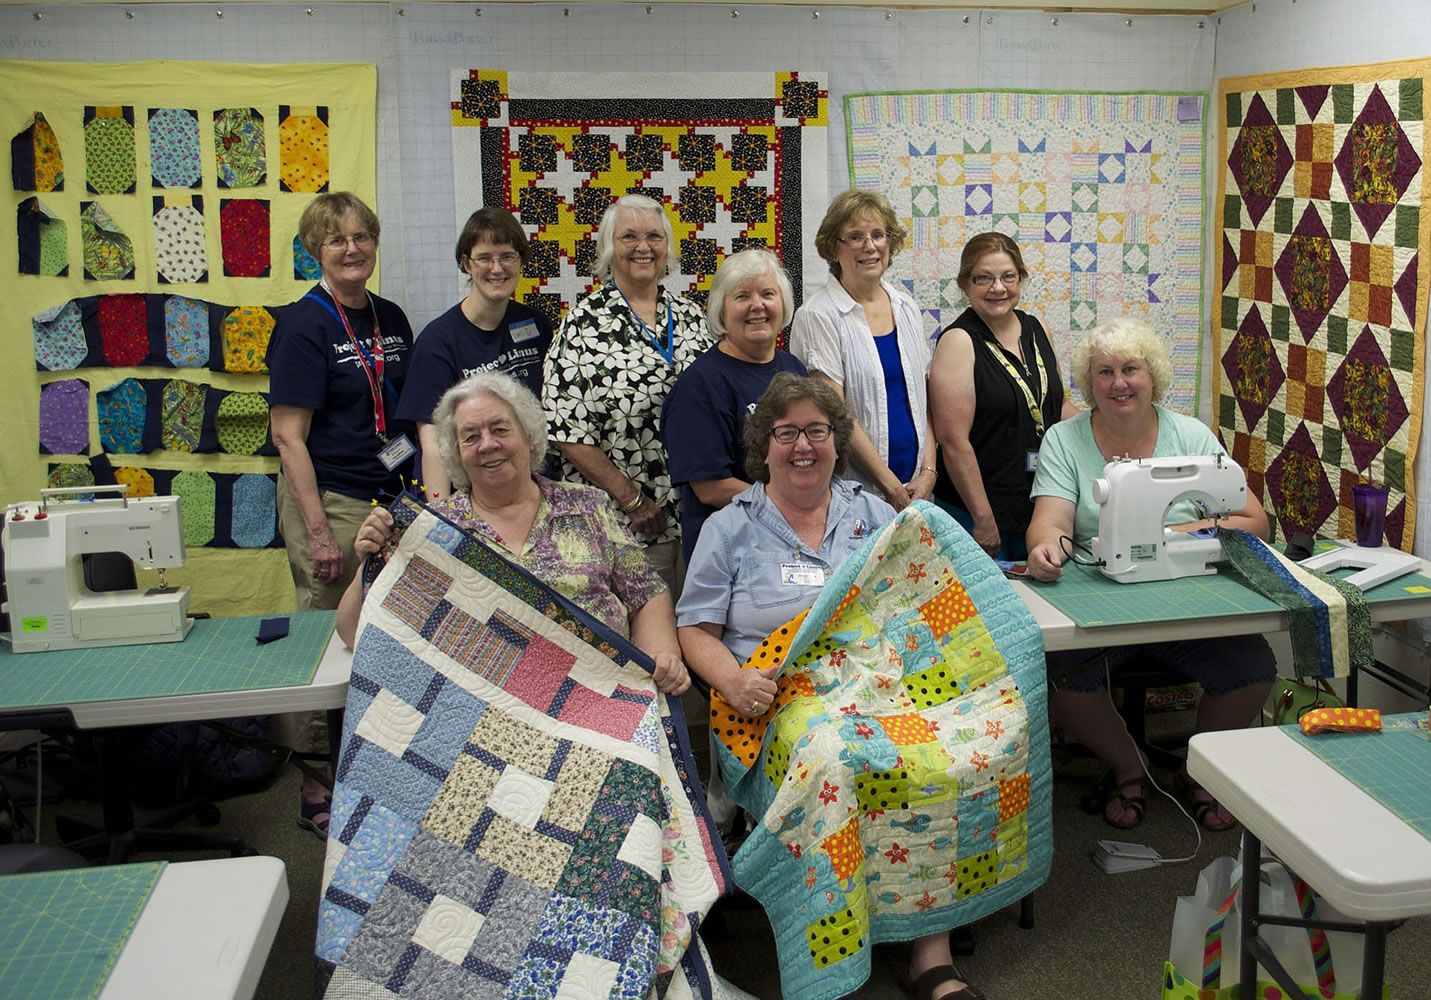 Northeast Hazel Dell: Project Linus members pose with quilts they made for children in need during a recent gathering at A Quilt Forever. Back row, from left: Lys Leitner, Lori Tate, Brenda Mitchell, Sandy Hubbard, Lynda Van de Grift, Nancy Foley-Hibberd, Cindy Strom.